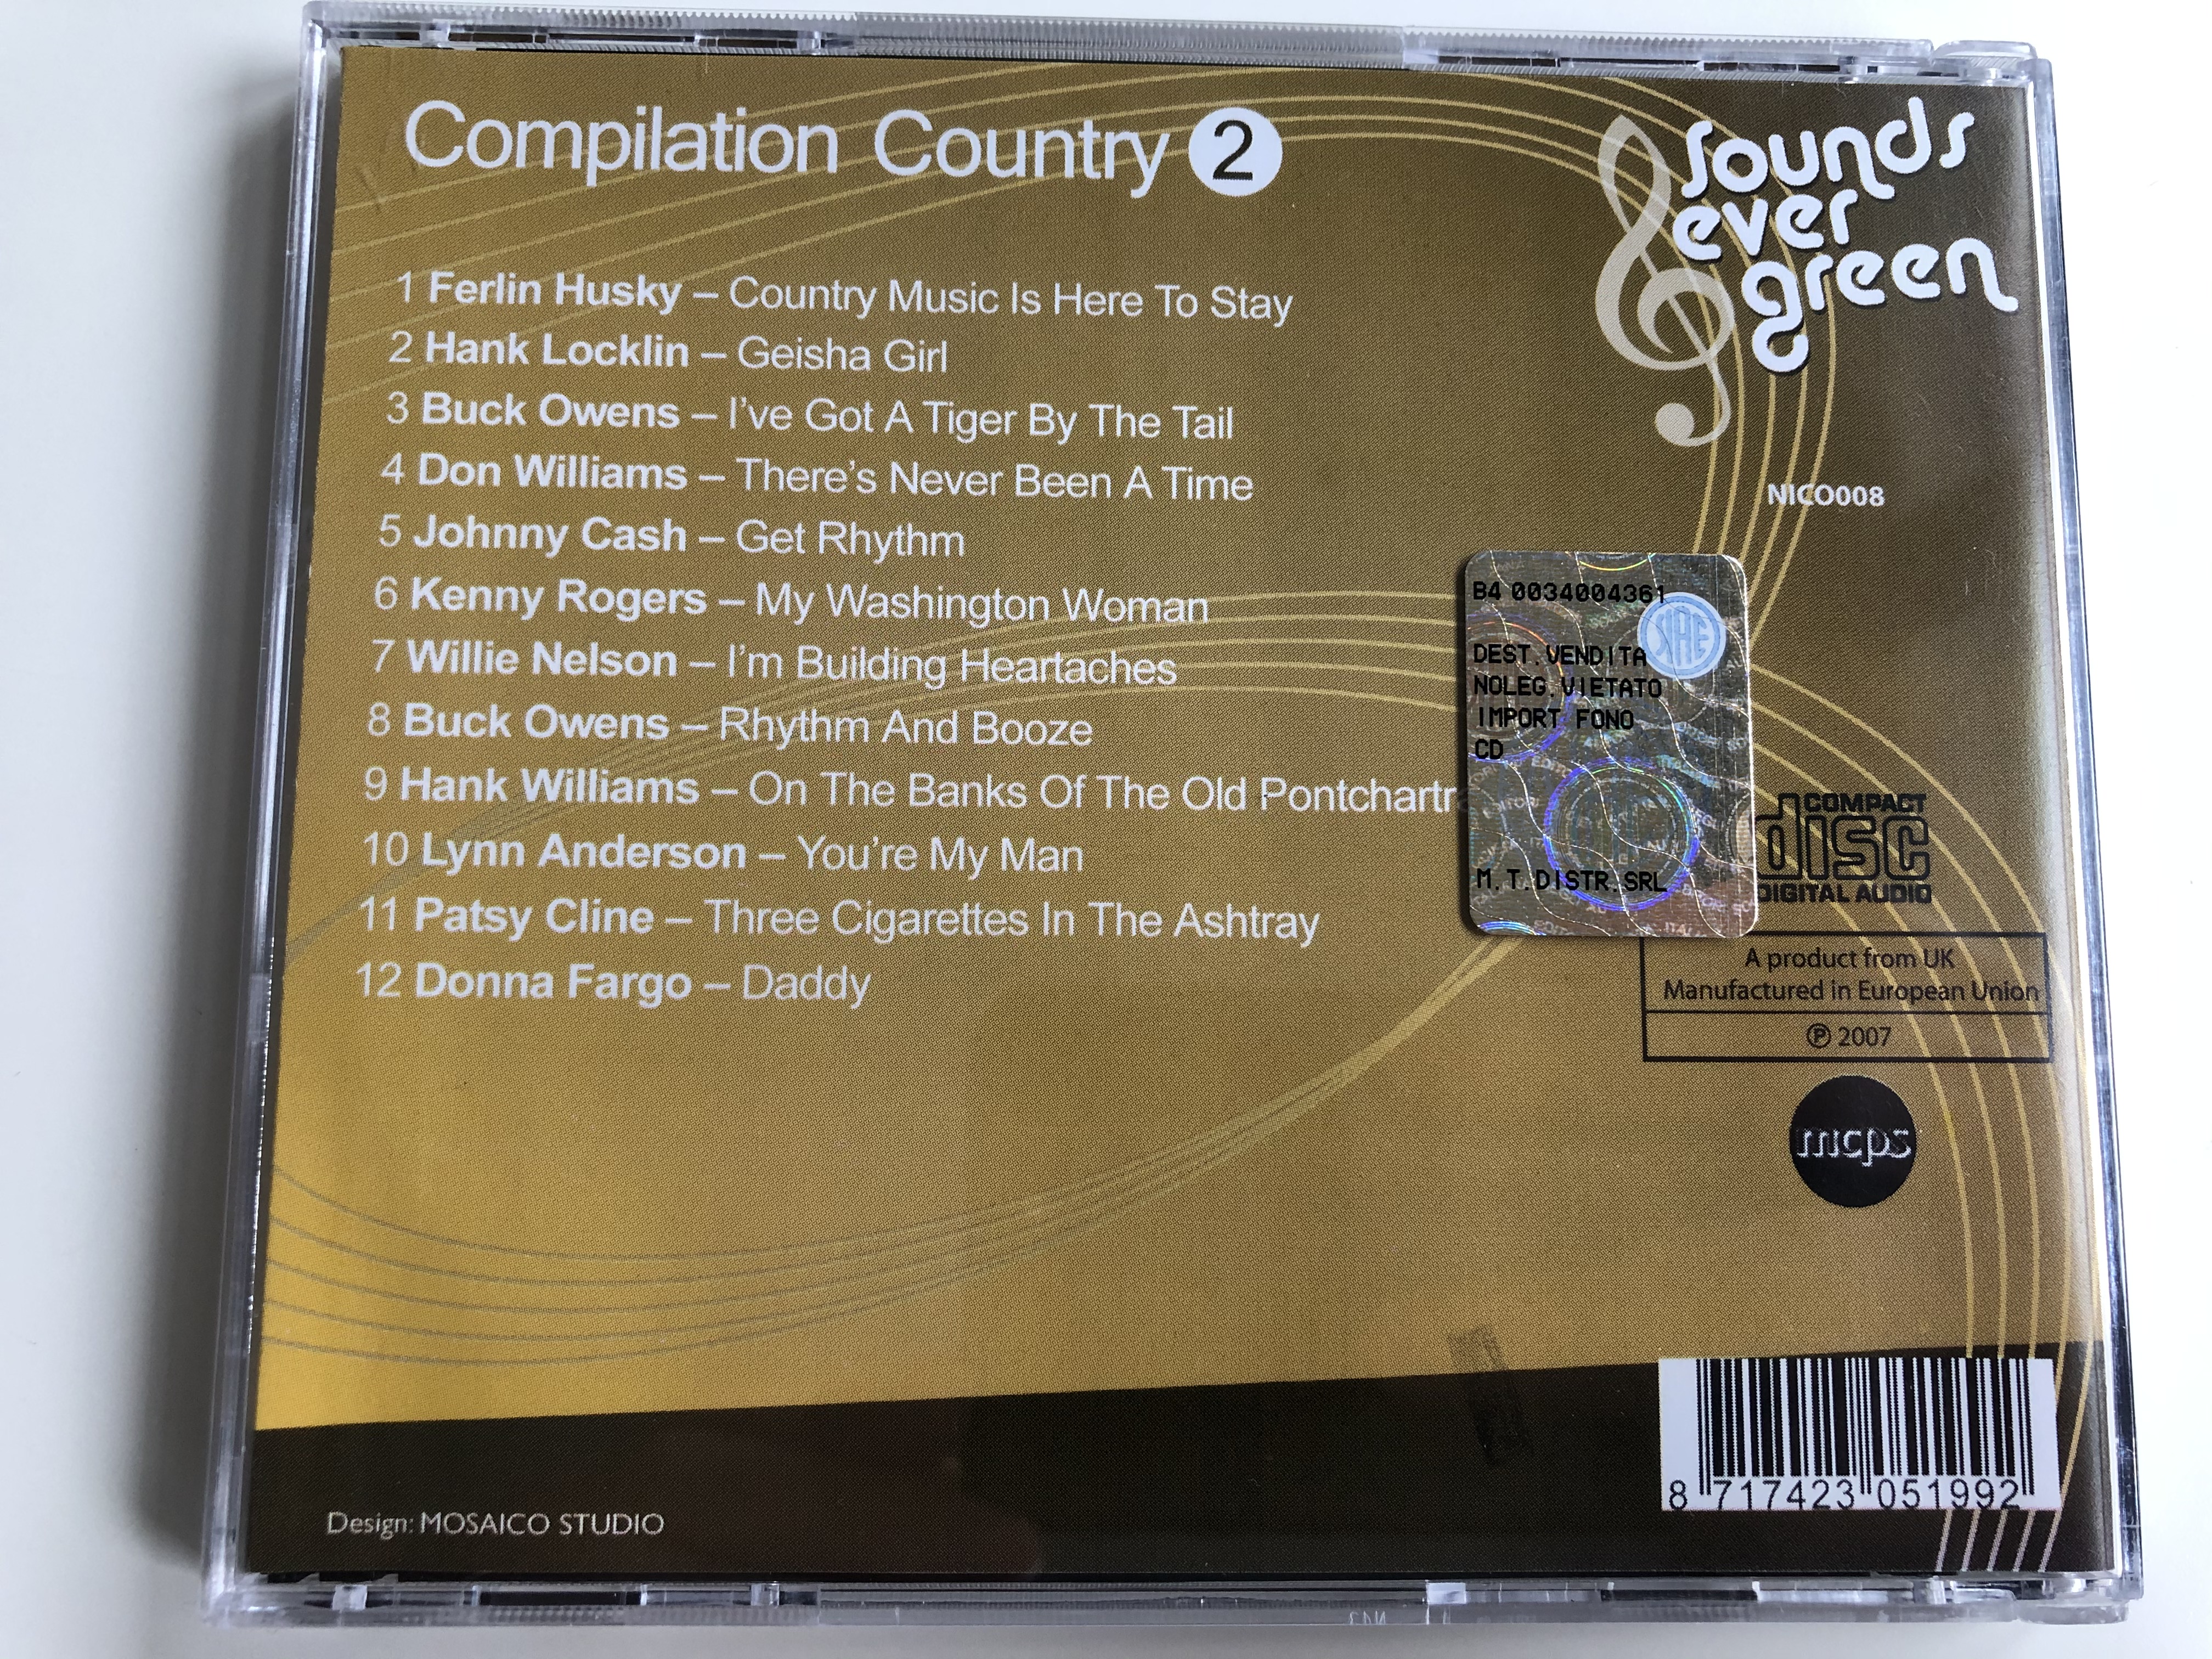 sounds-ever-green-compilation-country-2-audio-cd-2007-nico008-4-.jpg